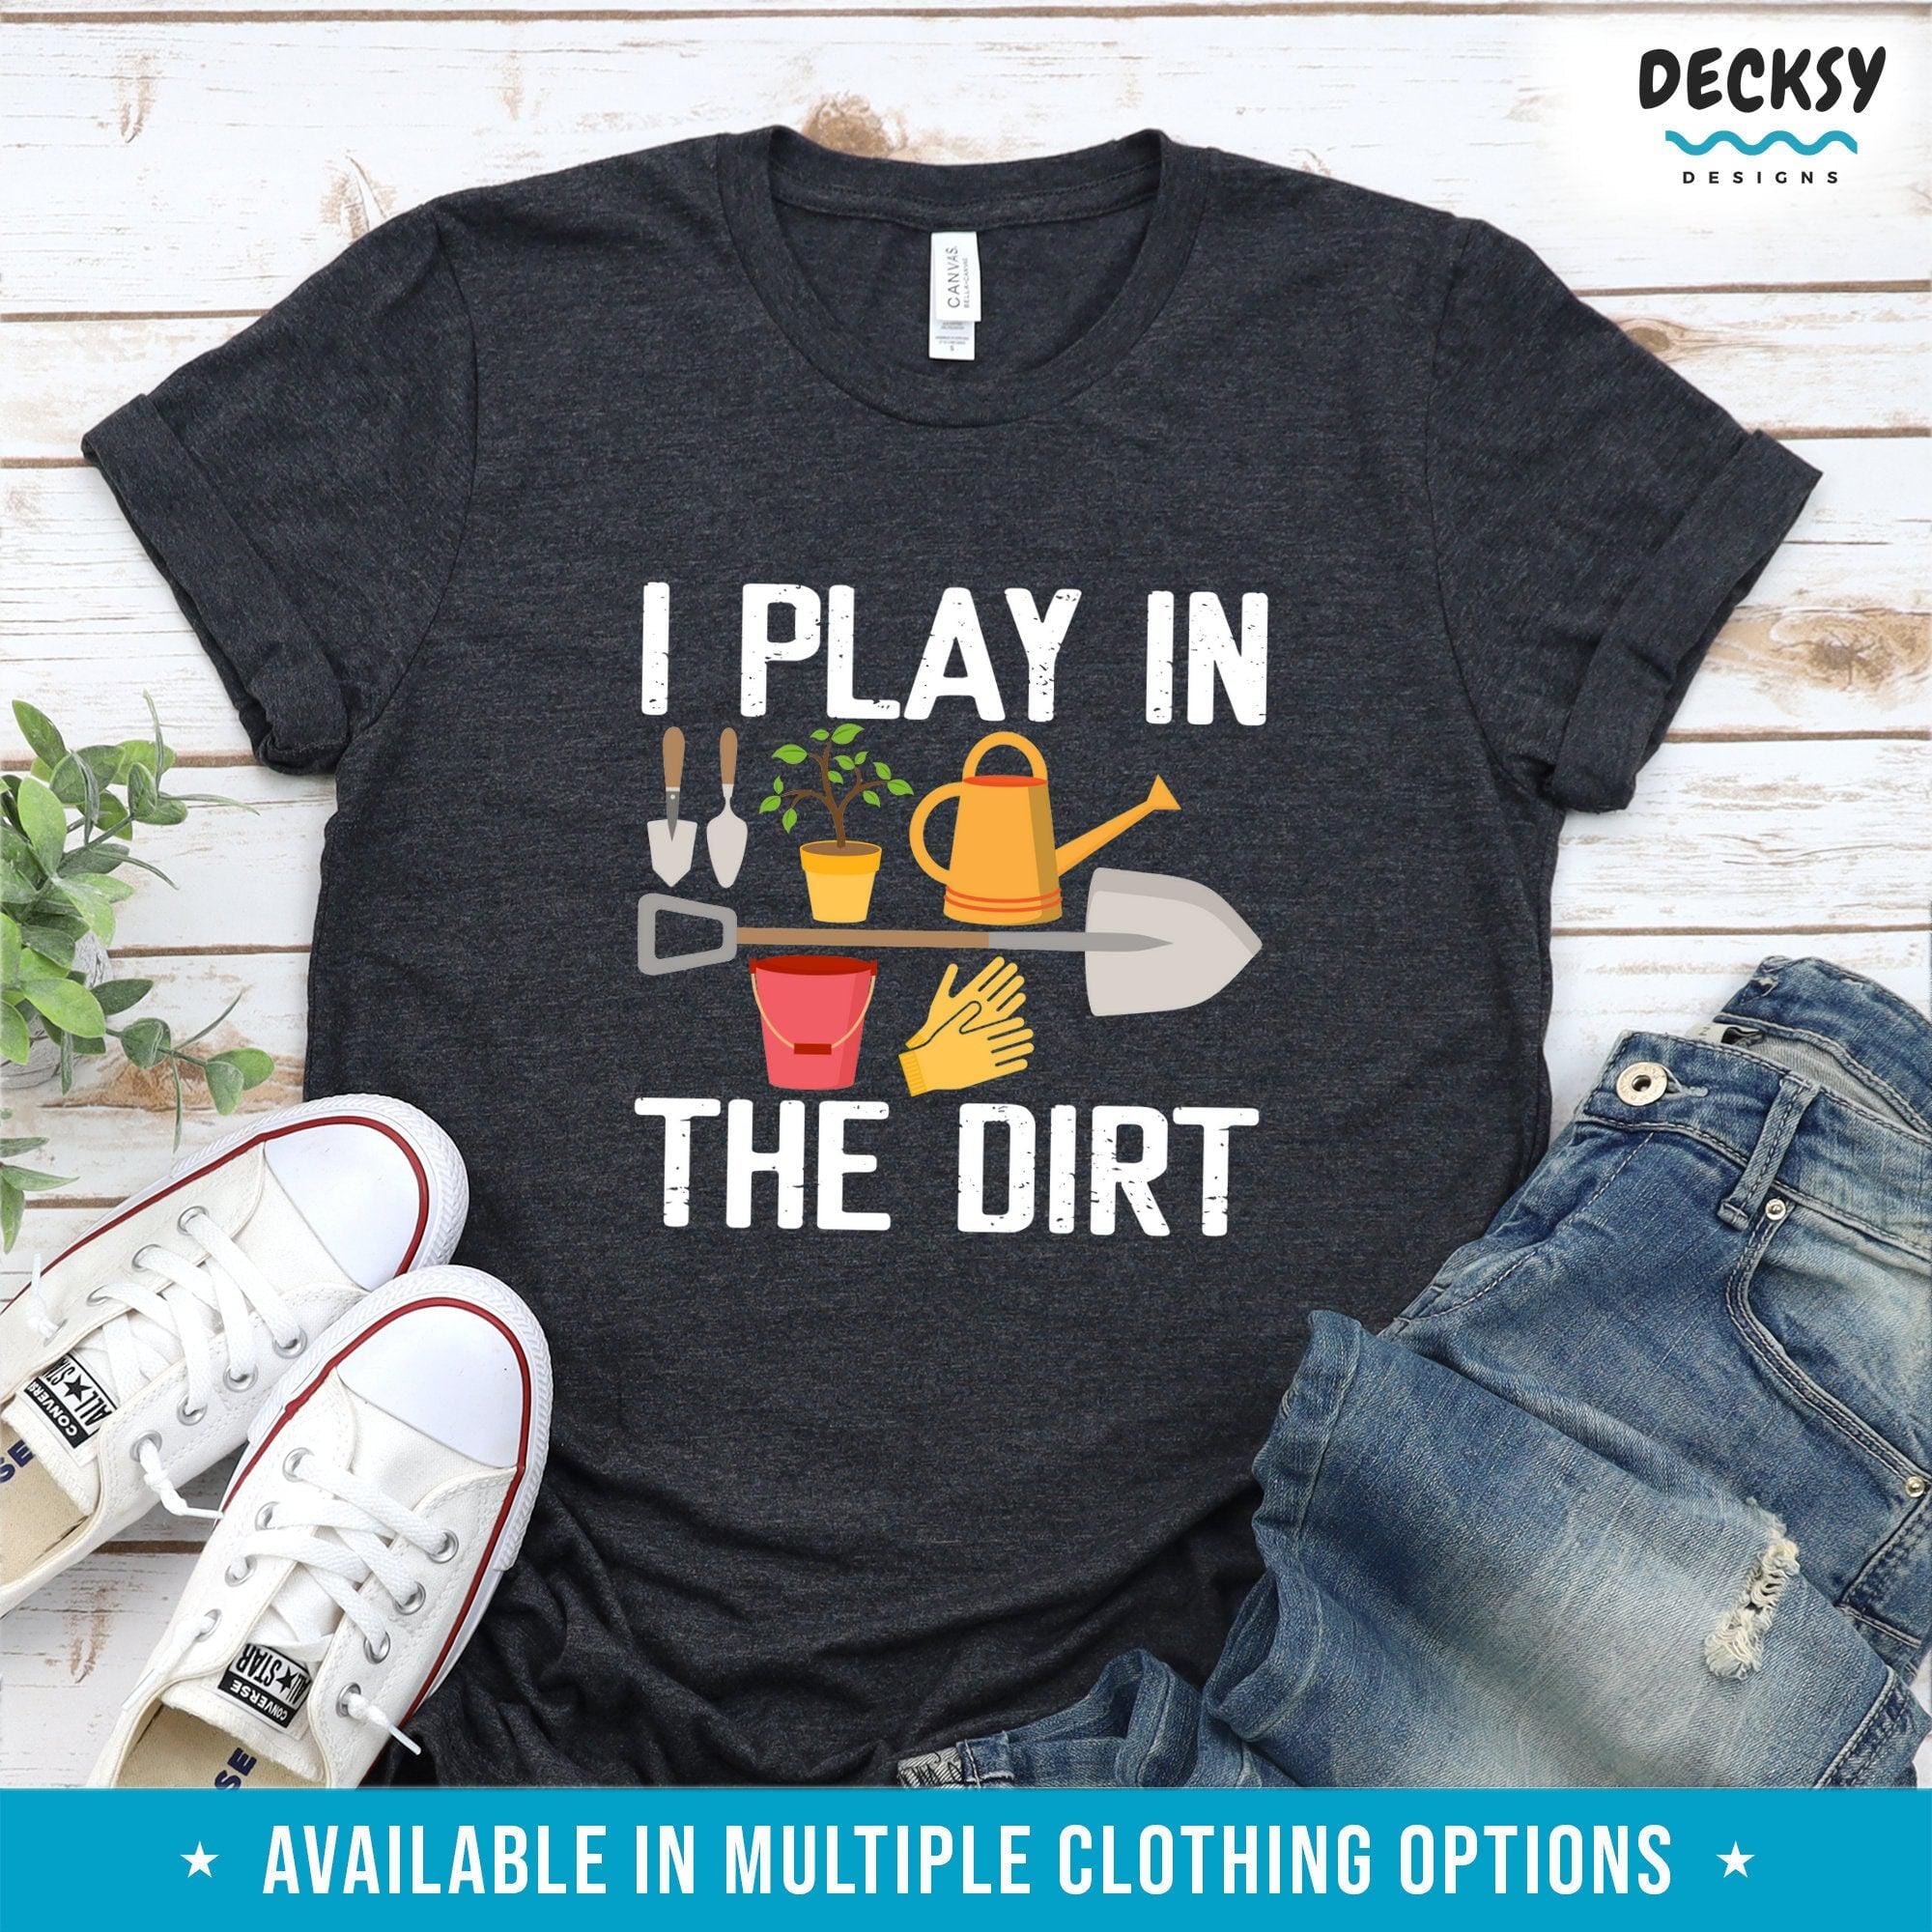 Garden Shirt, Funny Gardening Gift-Clothing:Gender-Neutral Adult Clothing:Tops & Tees:T-shirts:Graphic Tees-DecksyDesigns